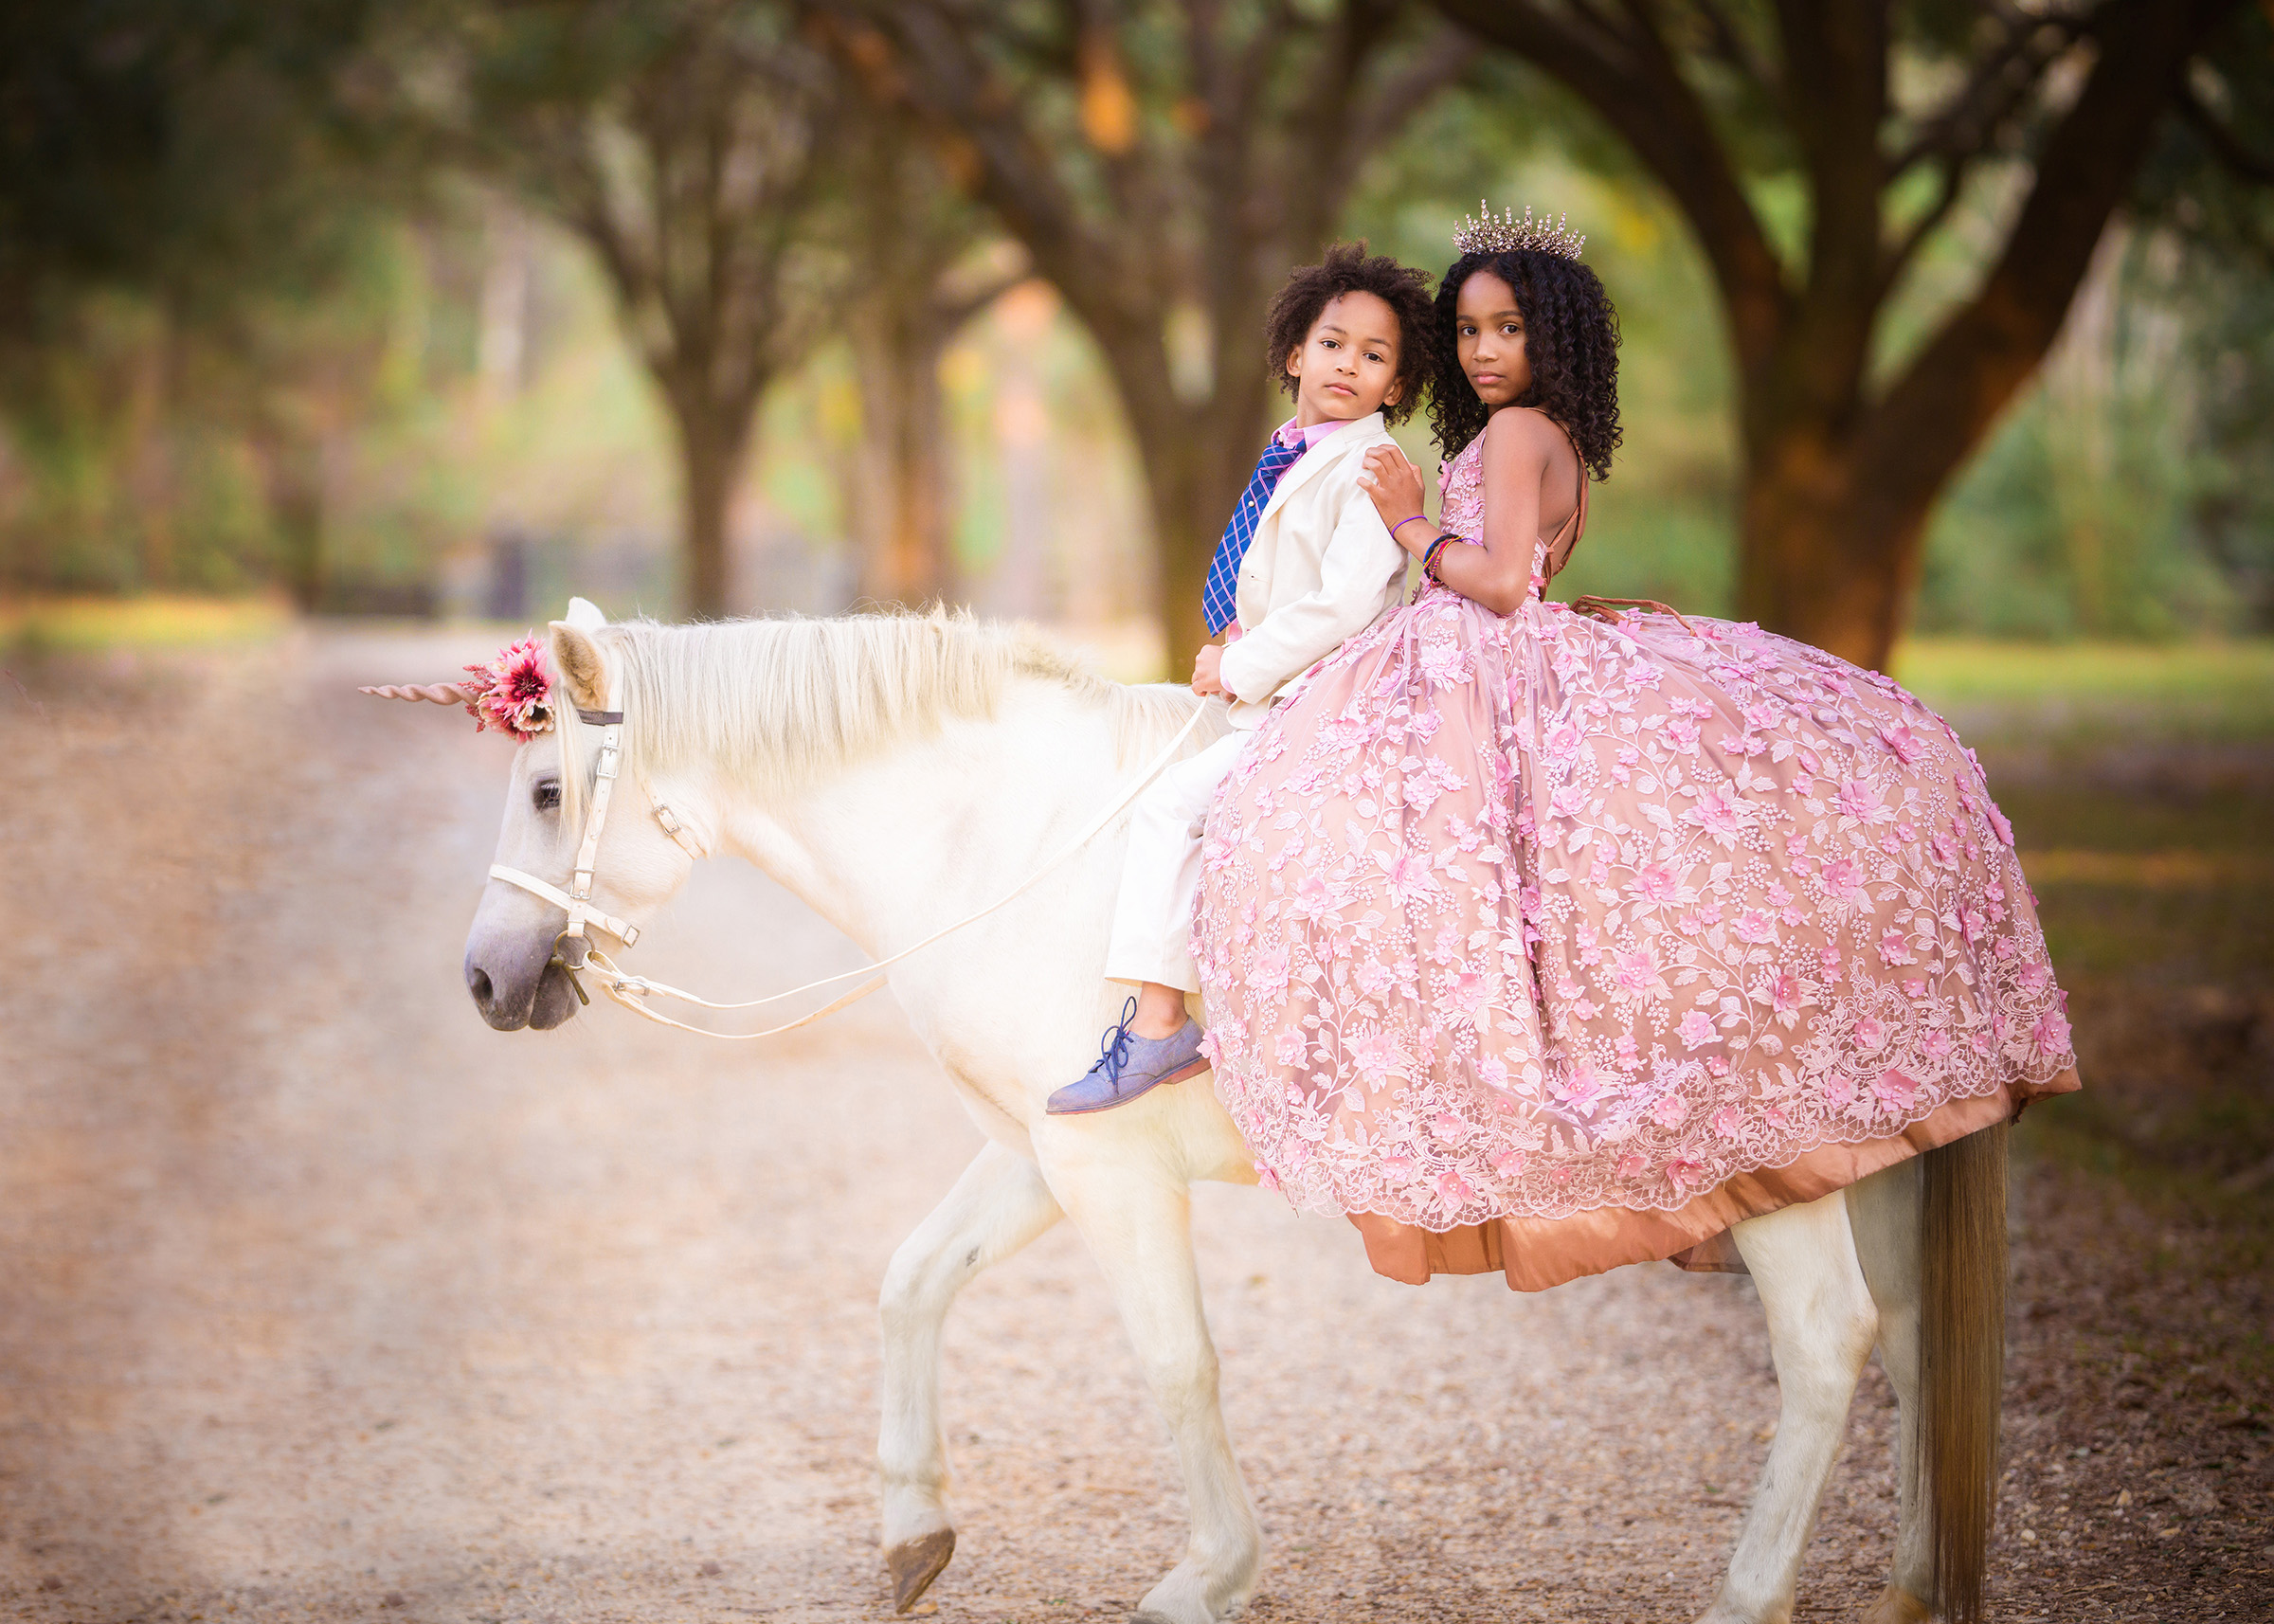 Photo of black brother and sister on a white unicorn riding the horse on a gravel path under oak trees